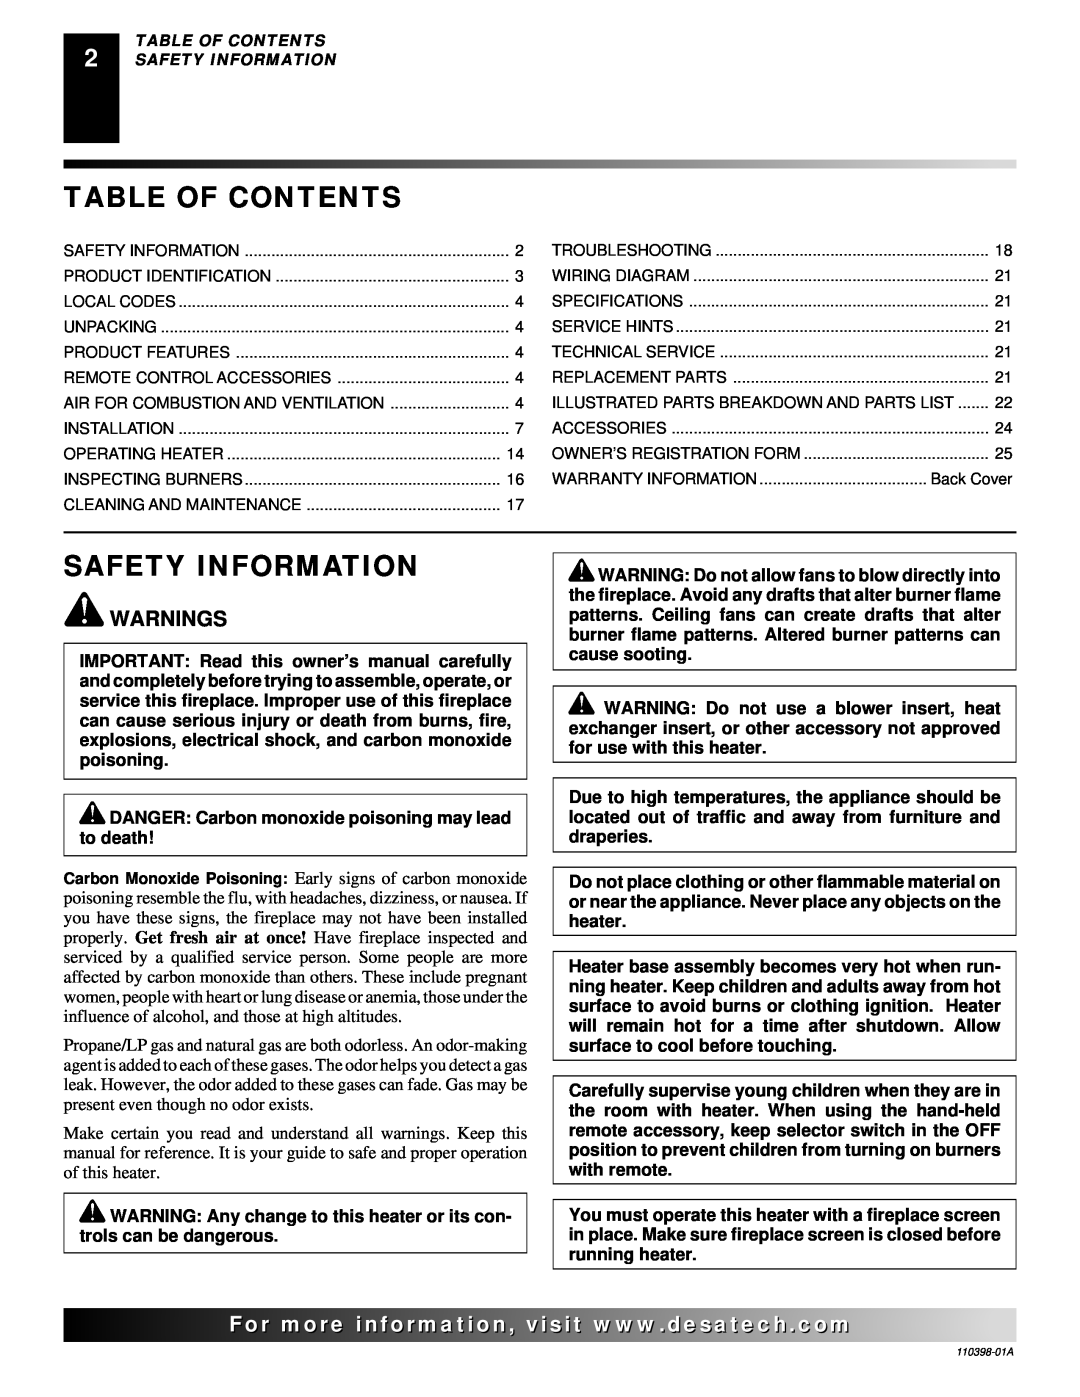 Desa VYM27NRPR installation manual Table Of Contents, Safety Information, For..com, Warnings 